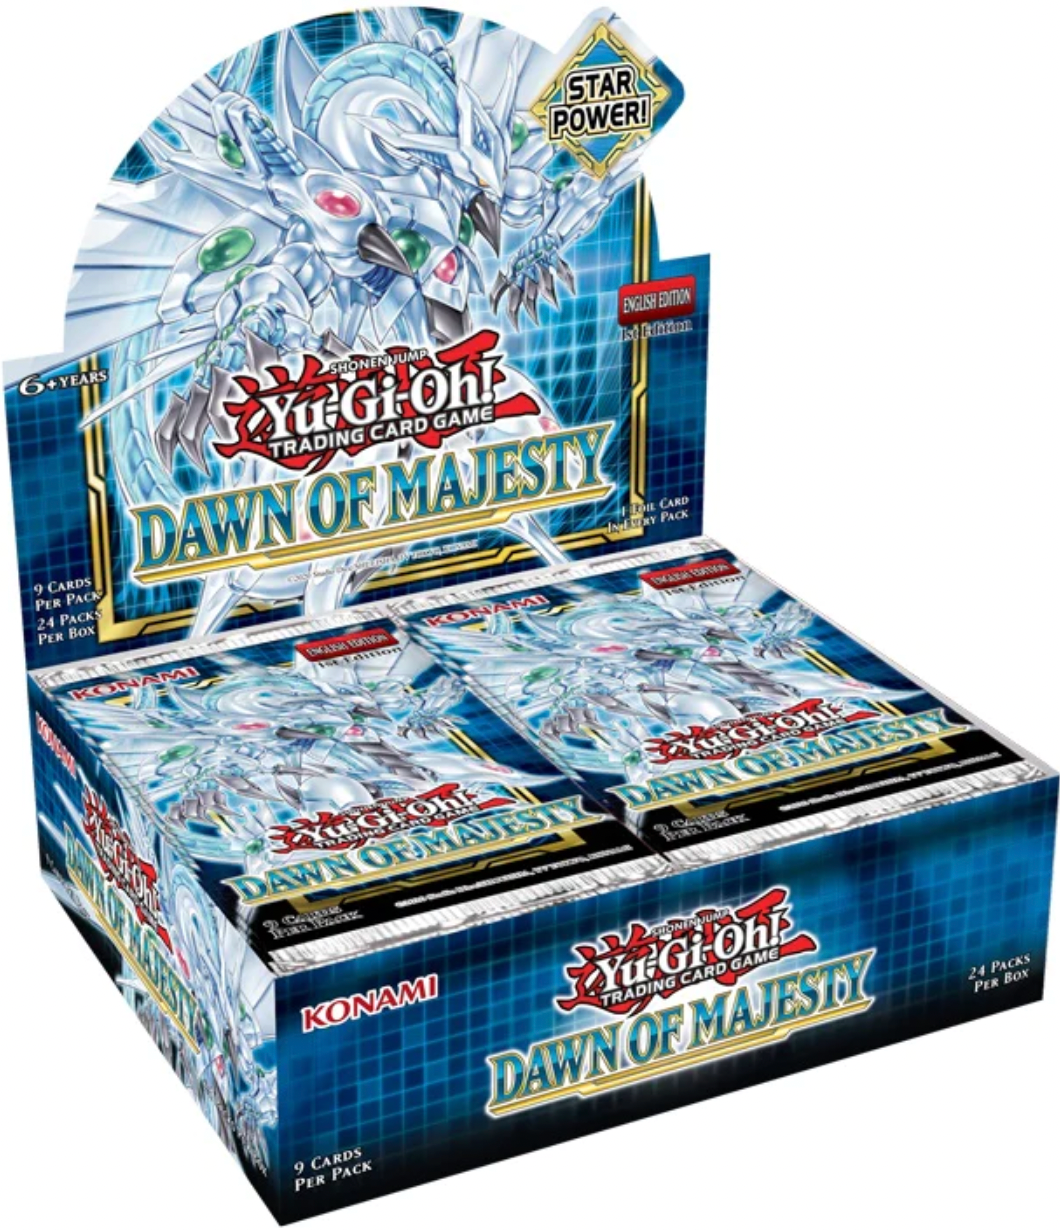 Dawn of Majesty Booster Boxes